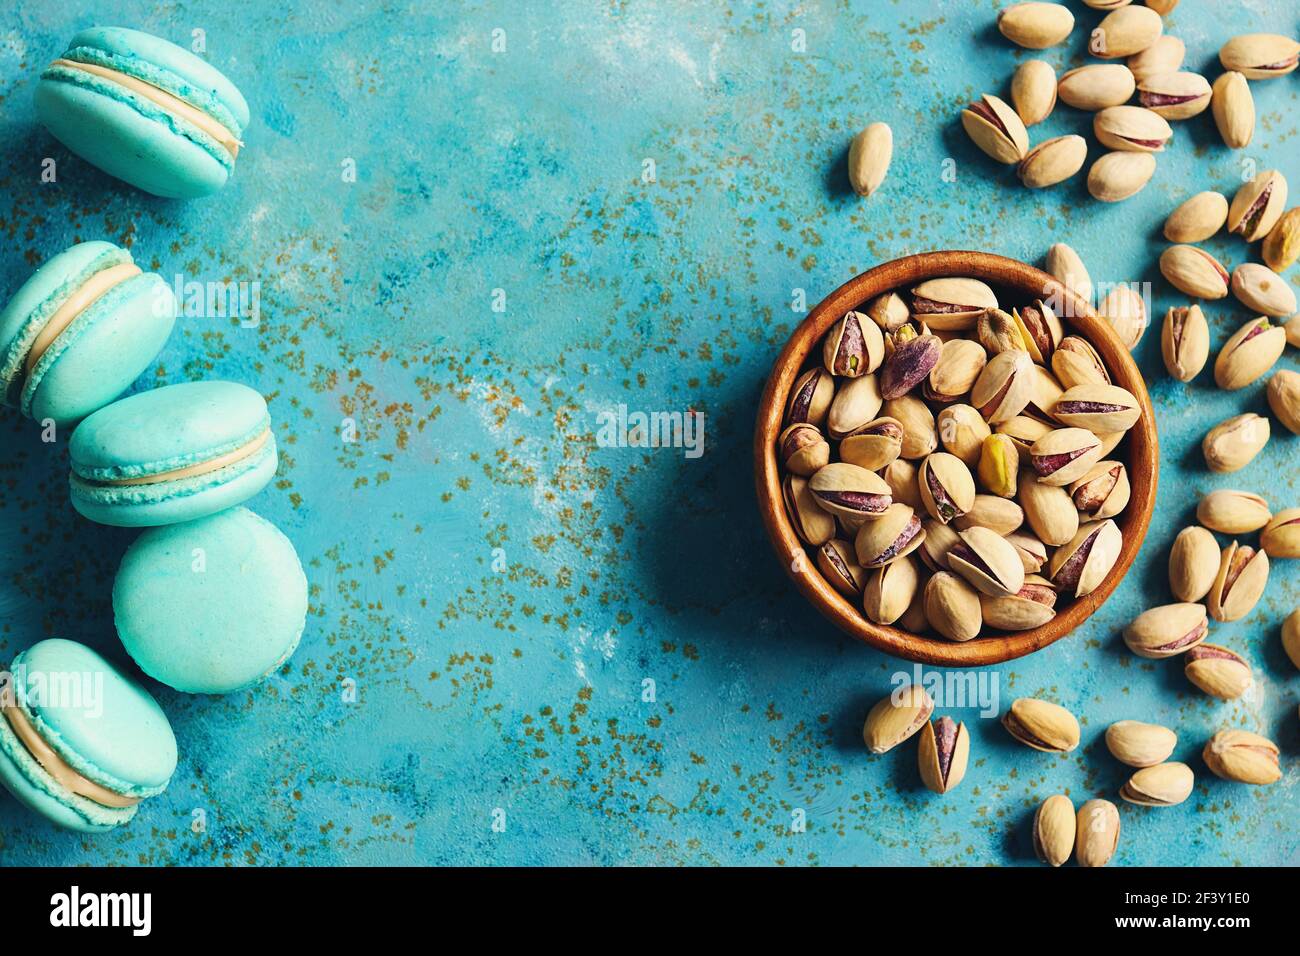 Pistachios in a bowl and pistachio flavored macarons Stock Photo